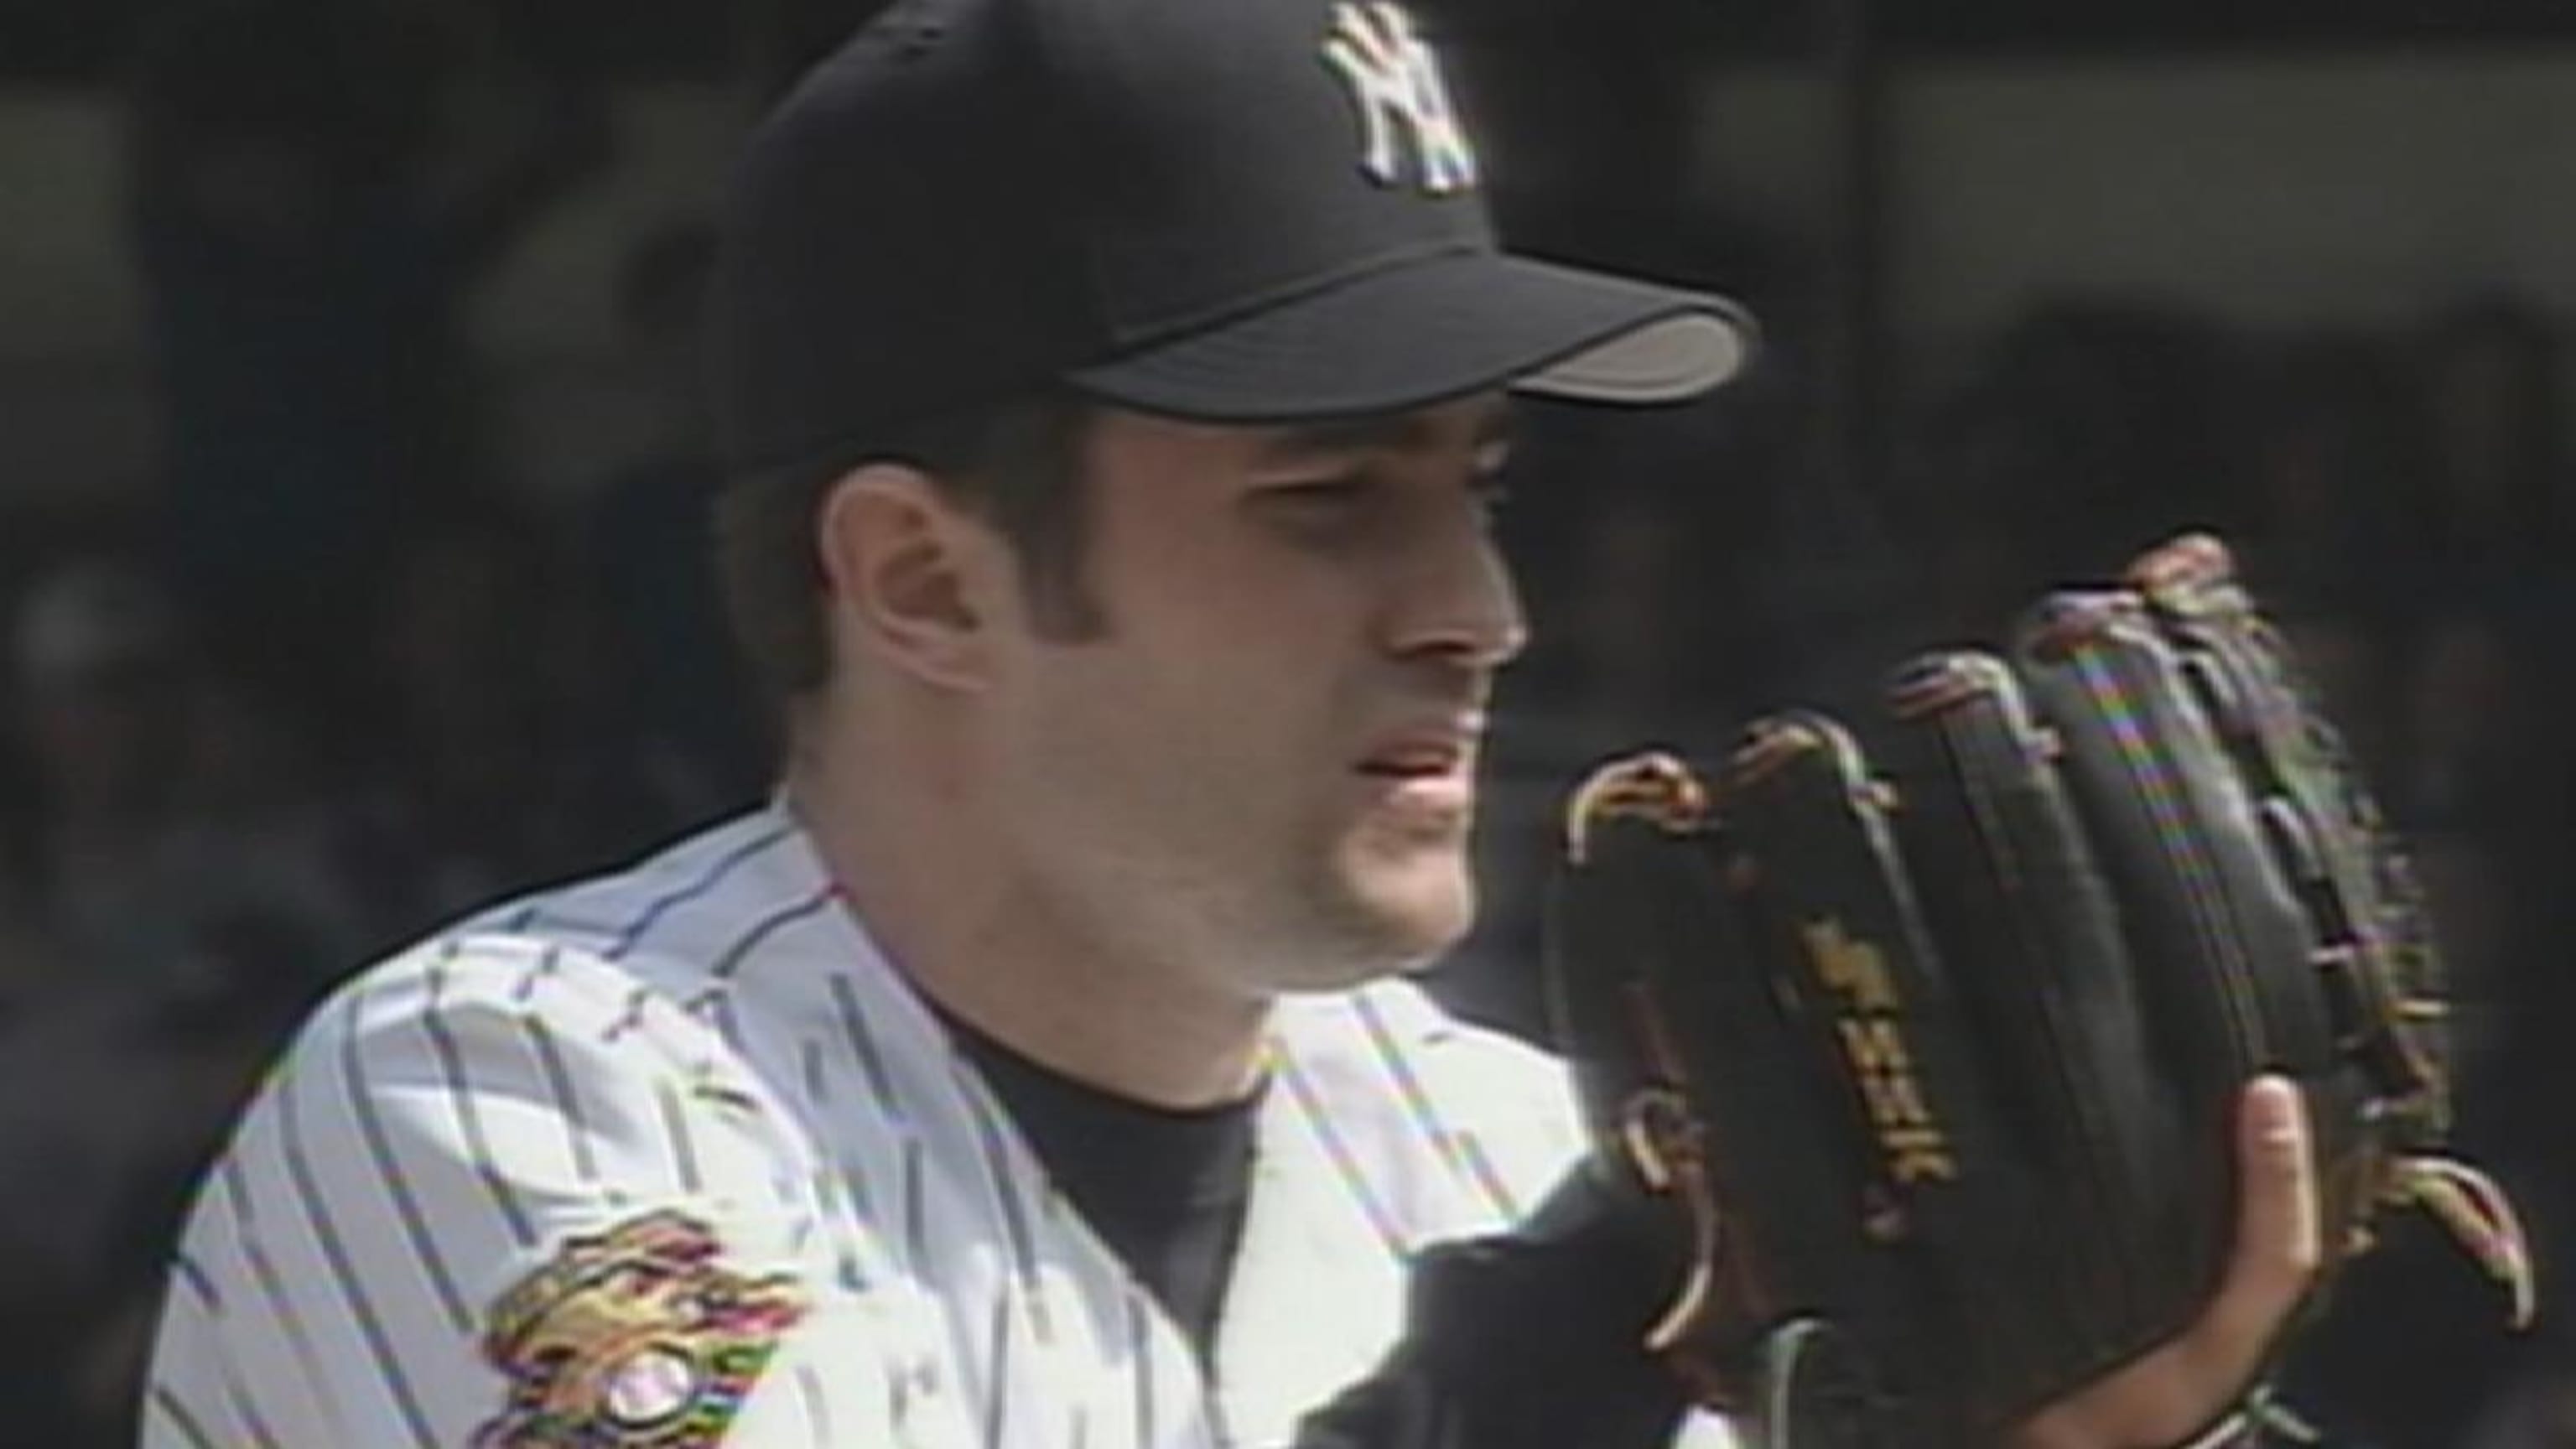 Montoursville Native Mike Mussina Elected to Baseball Hall of Fame